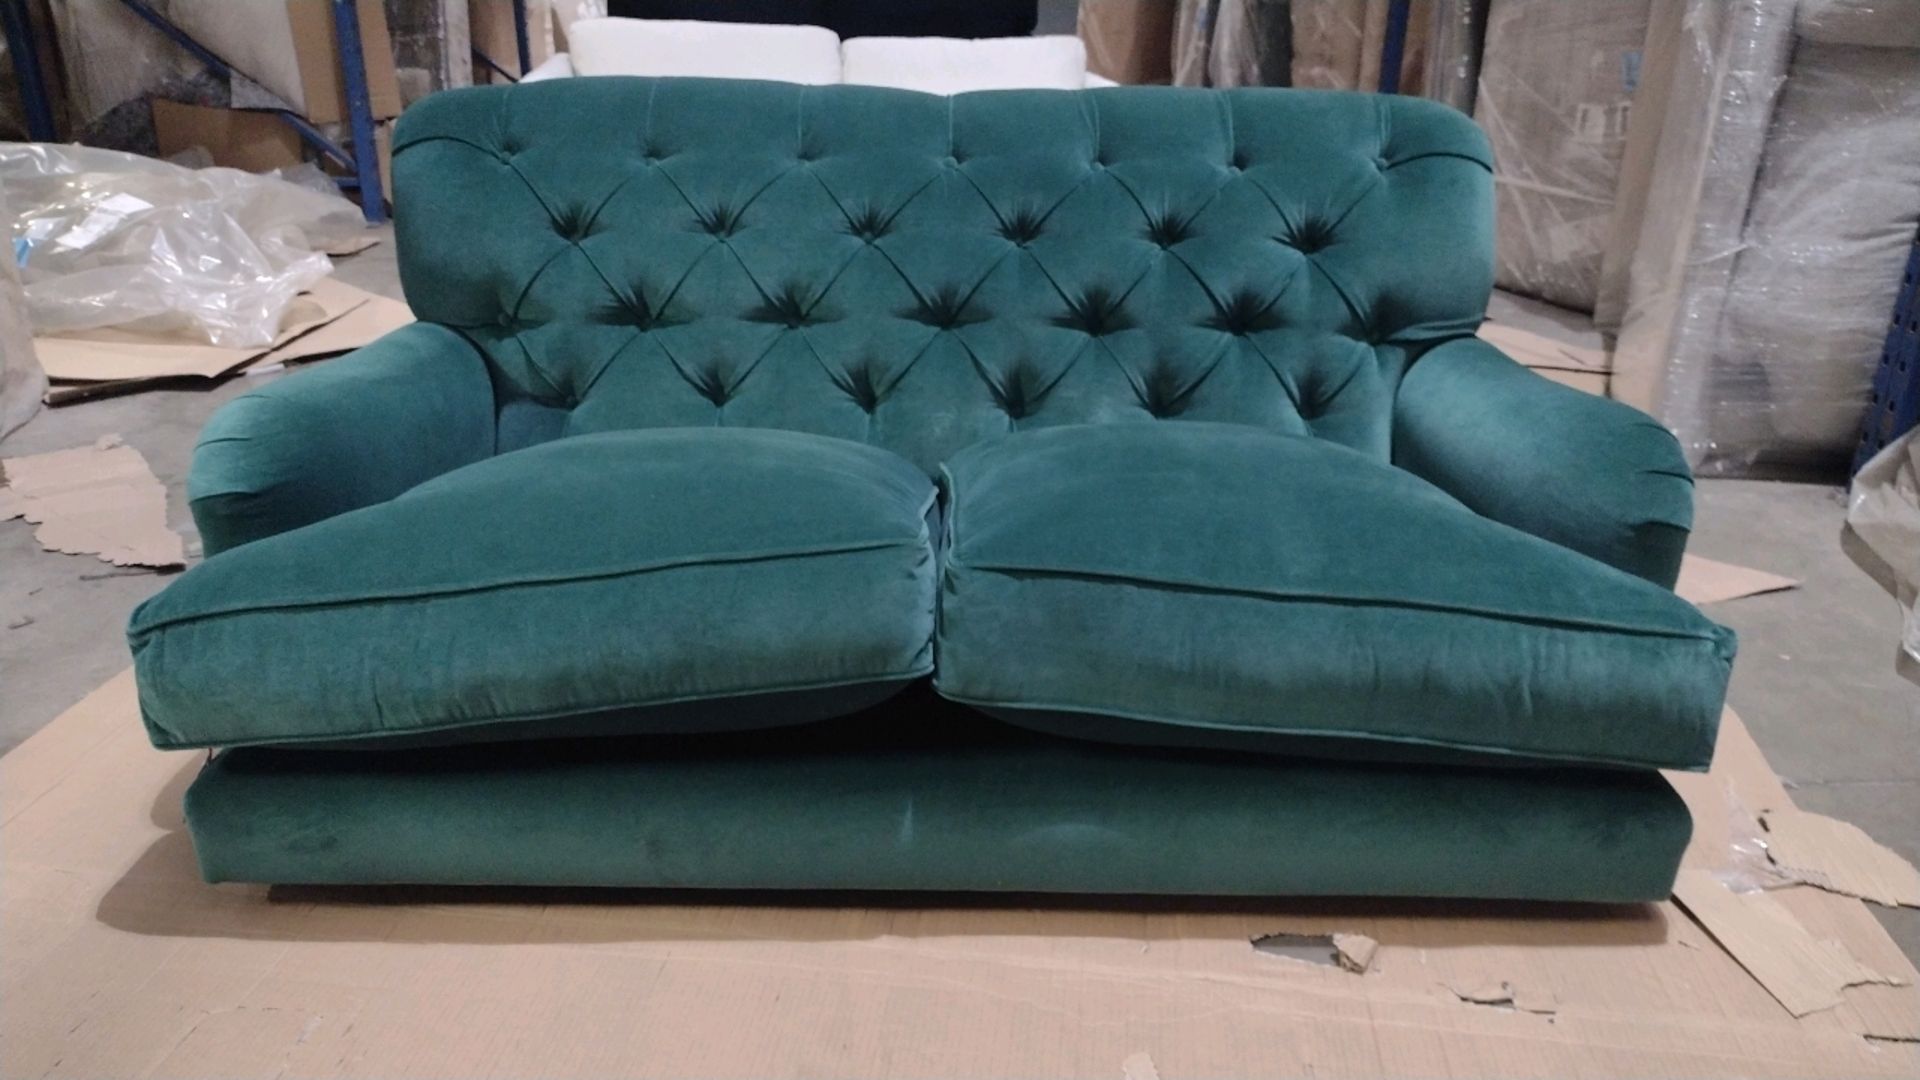 Snowdrop Button Back 2 Seat Sofa In Jade Smart Velvet RRP - £1890 - Image 2 of 9